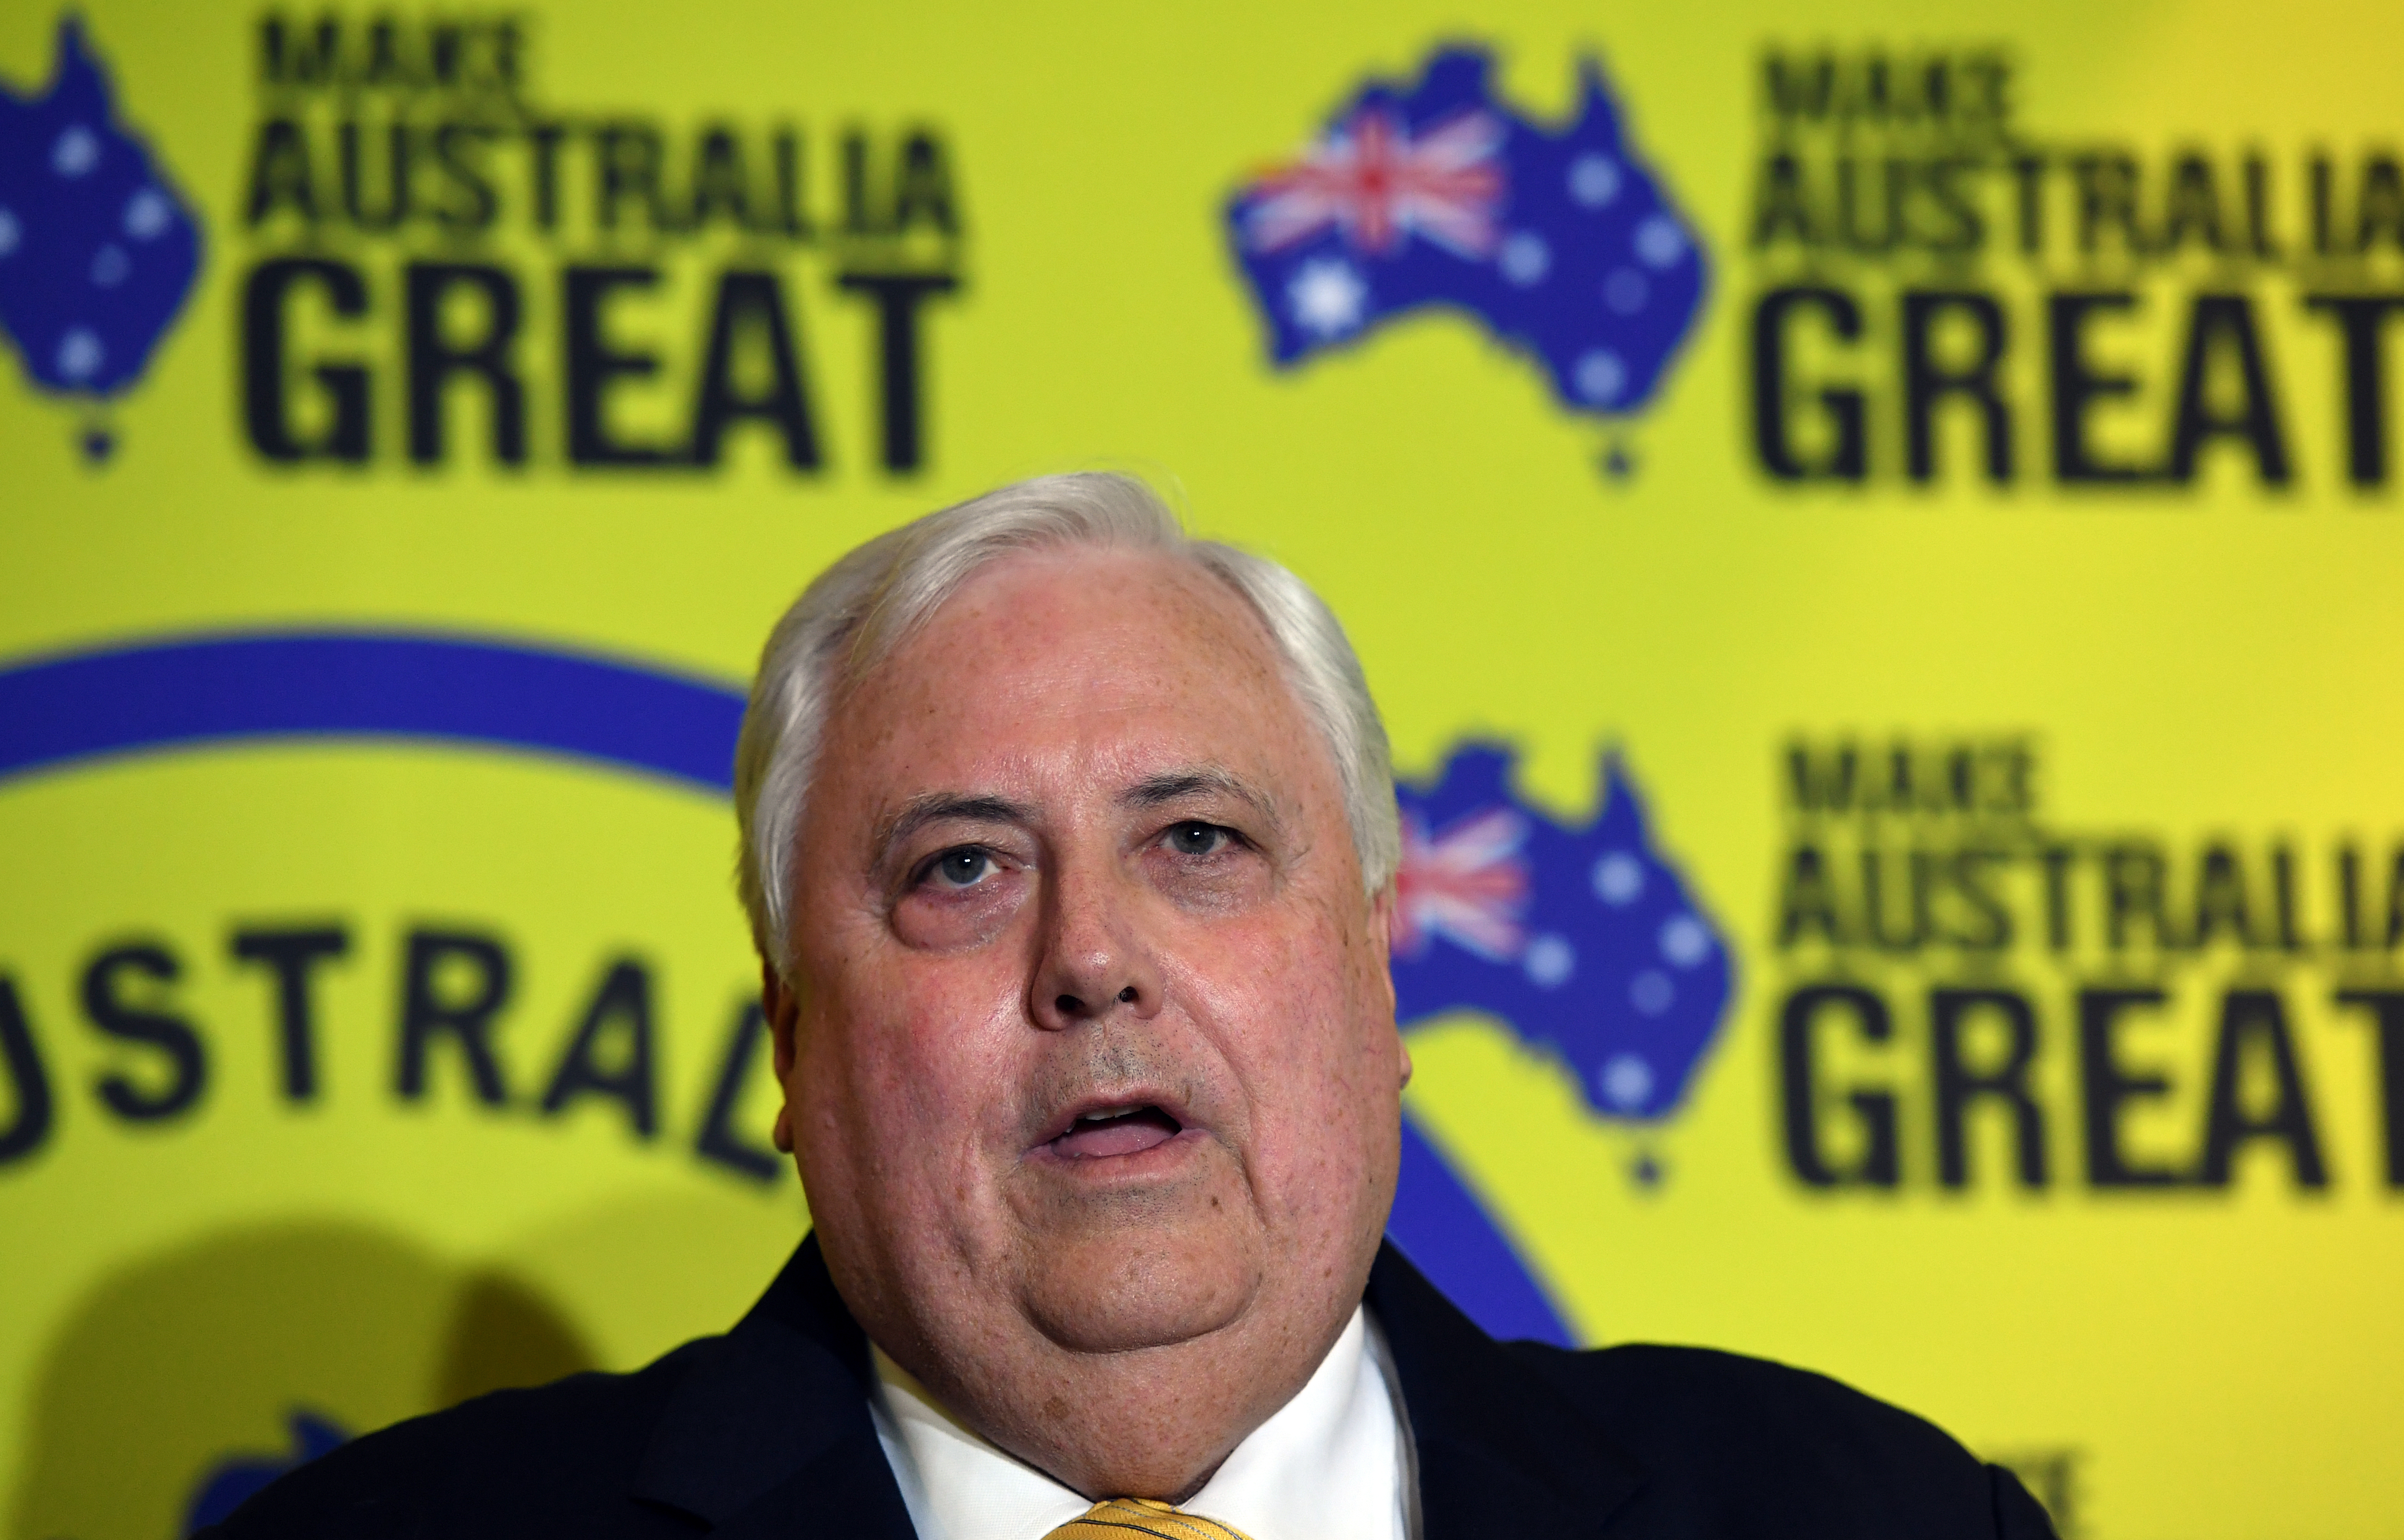 The true impact of the millions Clive Palmer has thrown at THOSE ads